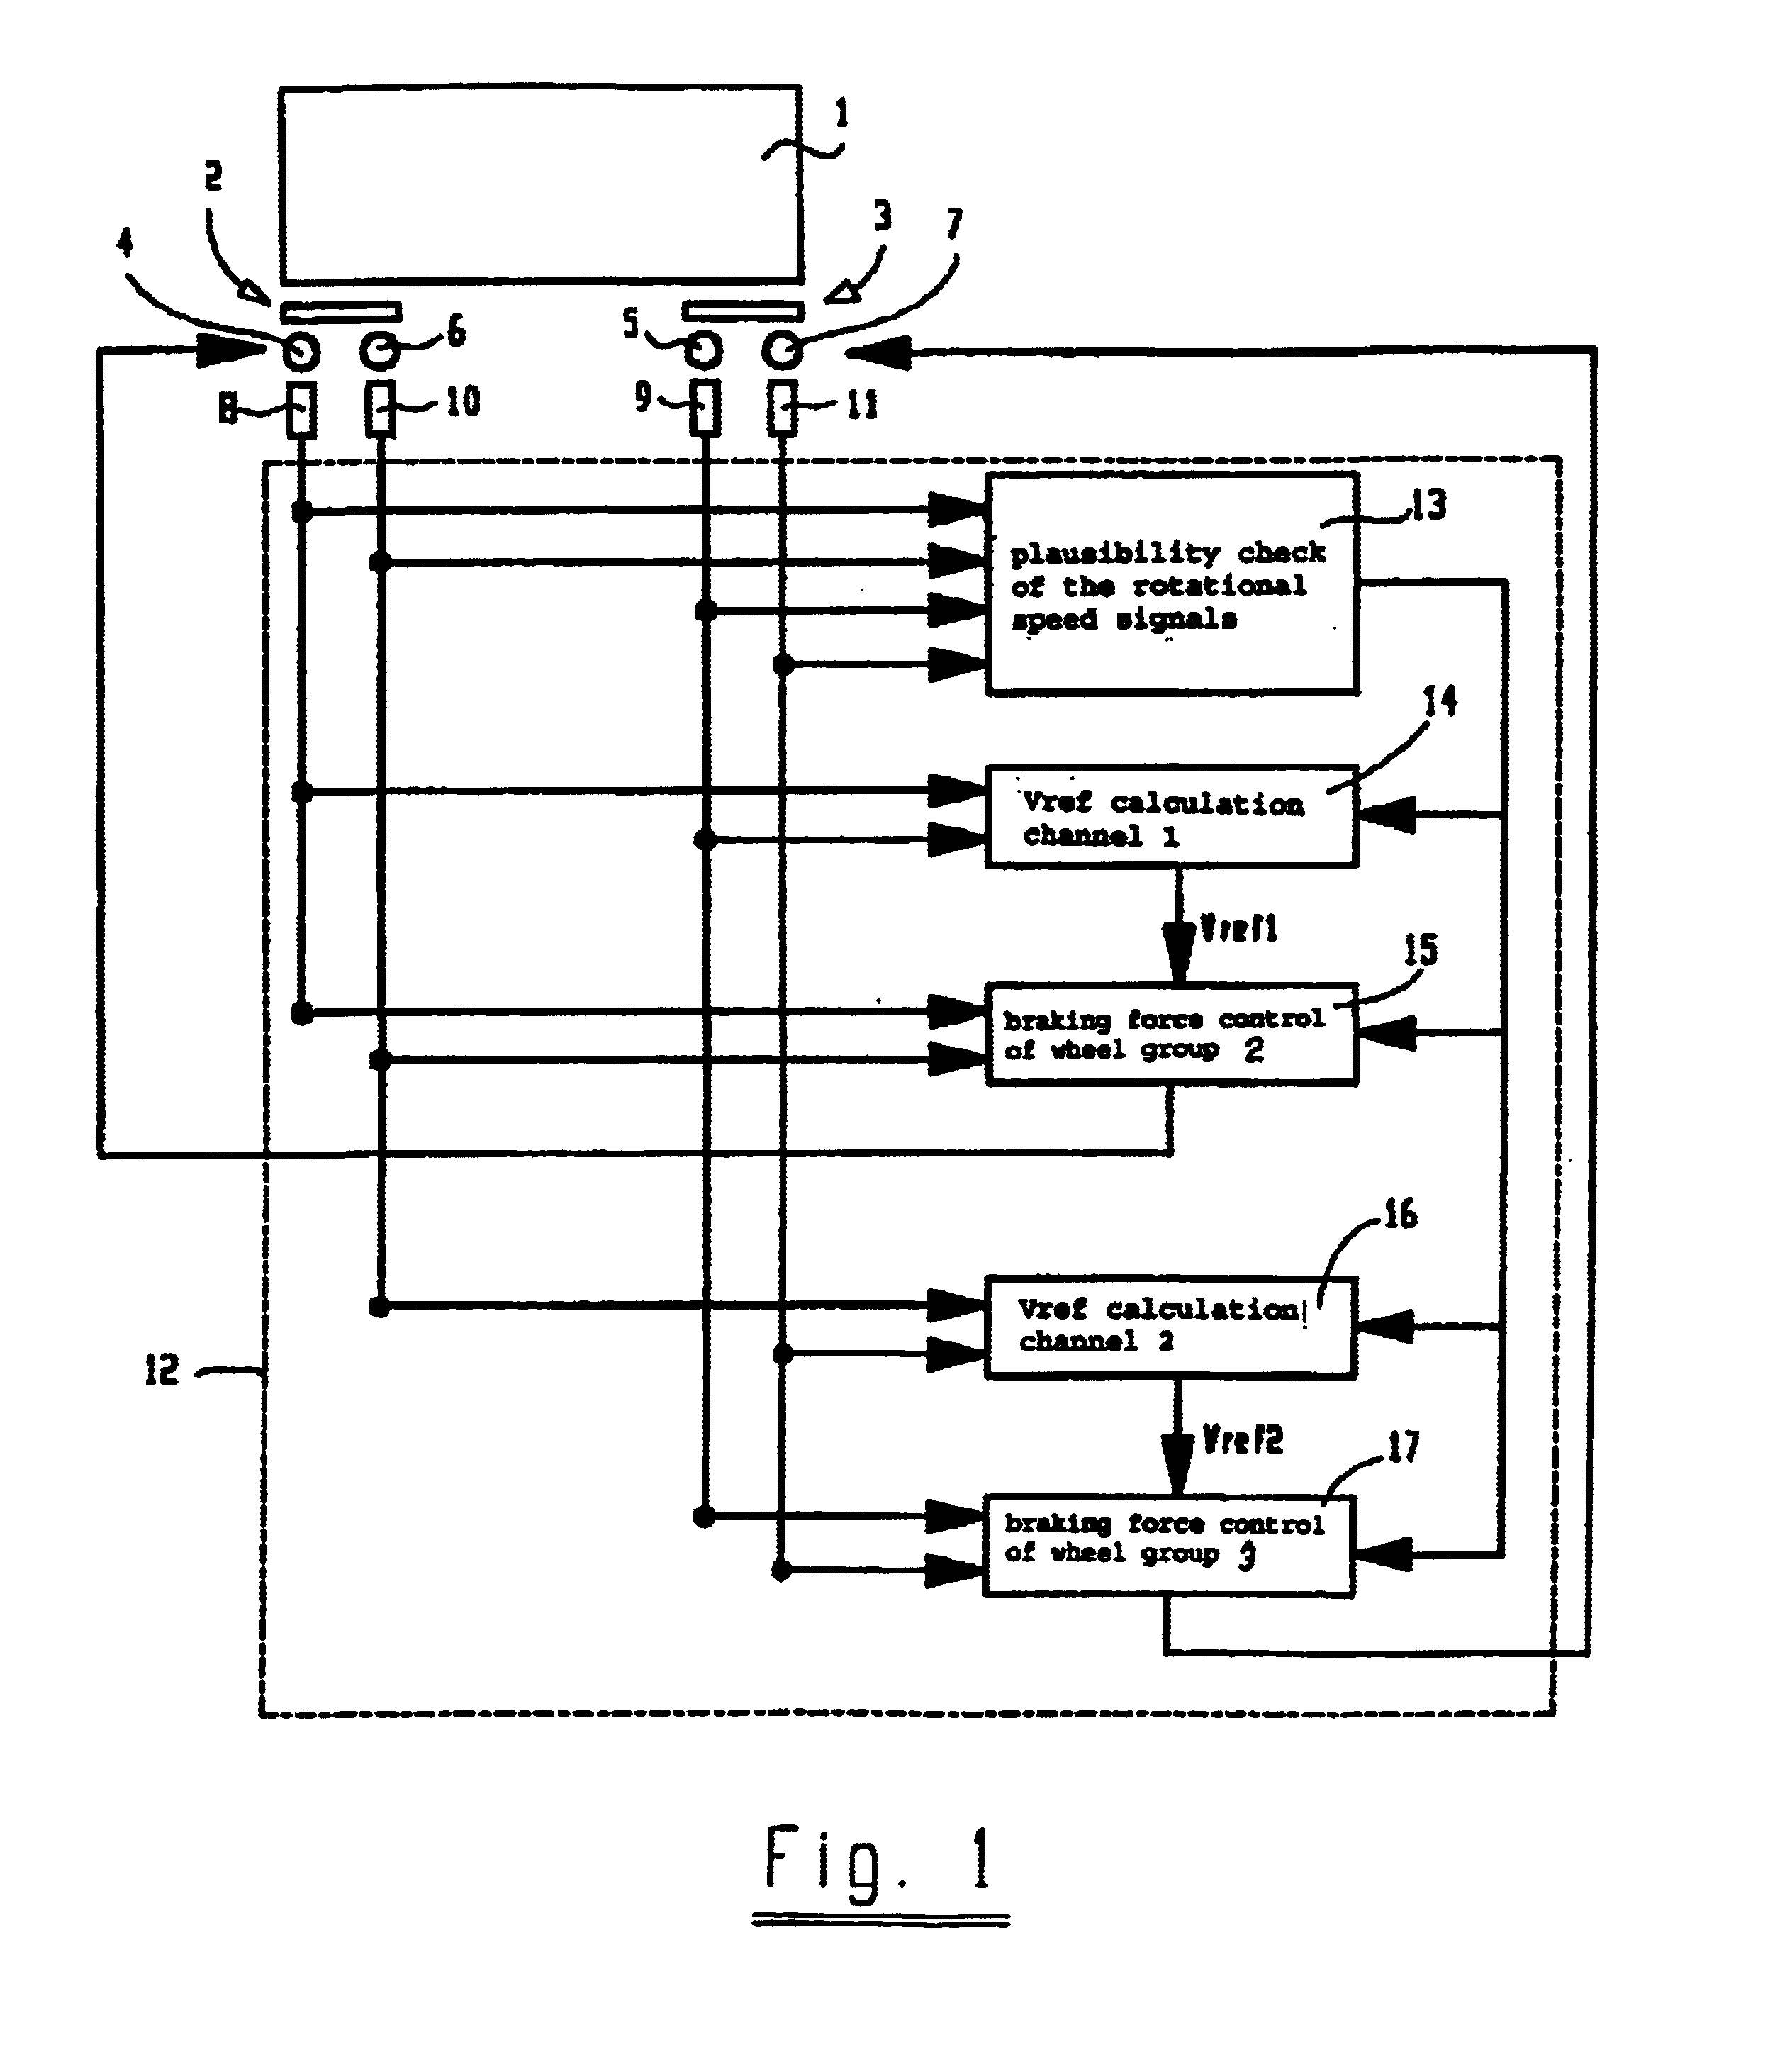 Braking system for vehicle provided with ABS or an anti-skid protection system